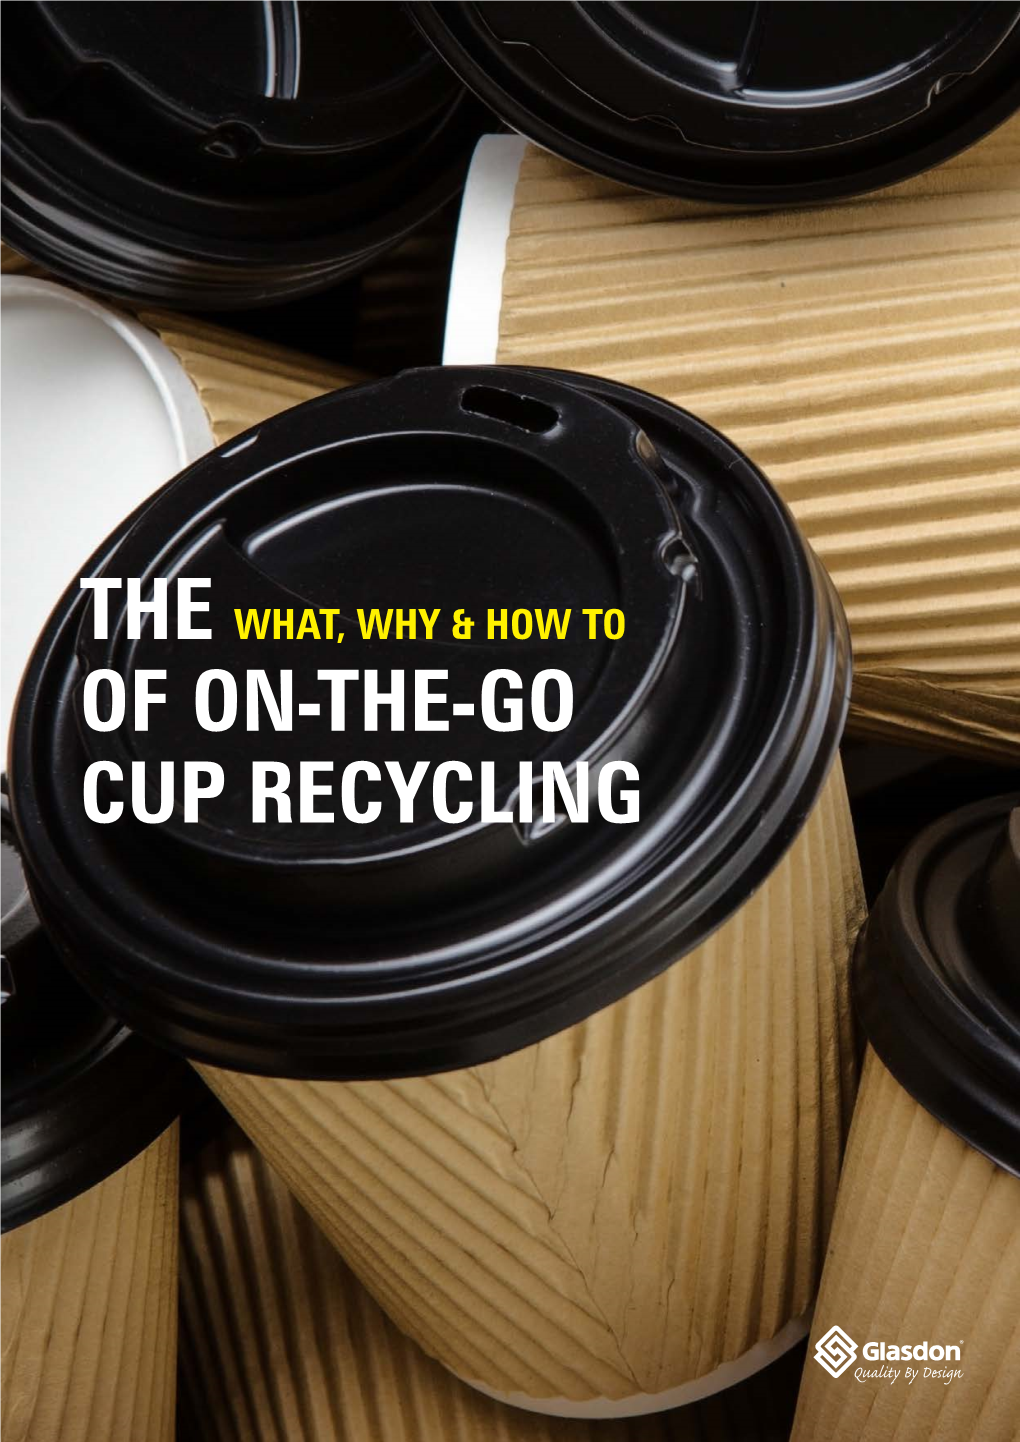 The What, Why & How to of On-The-Go Cup Recycling